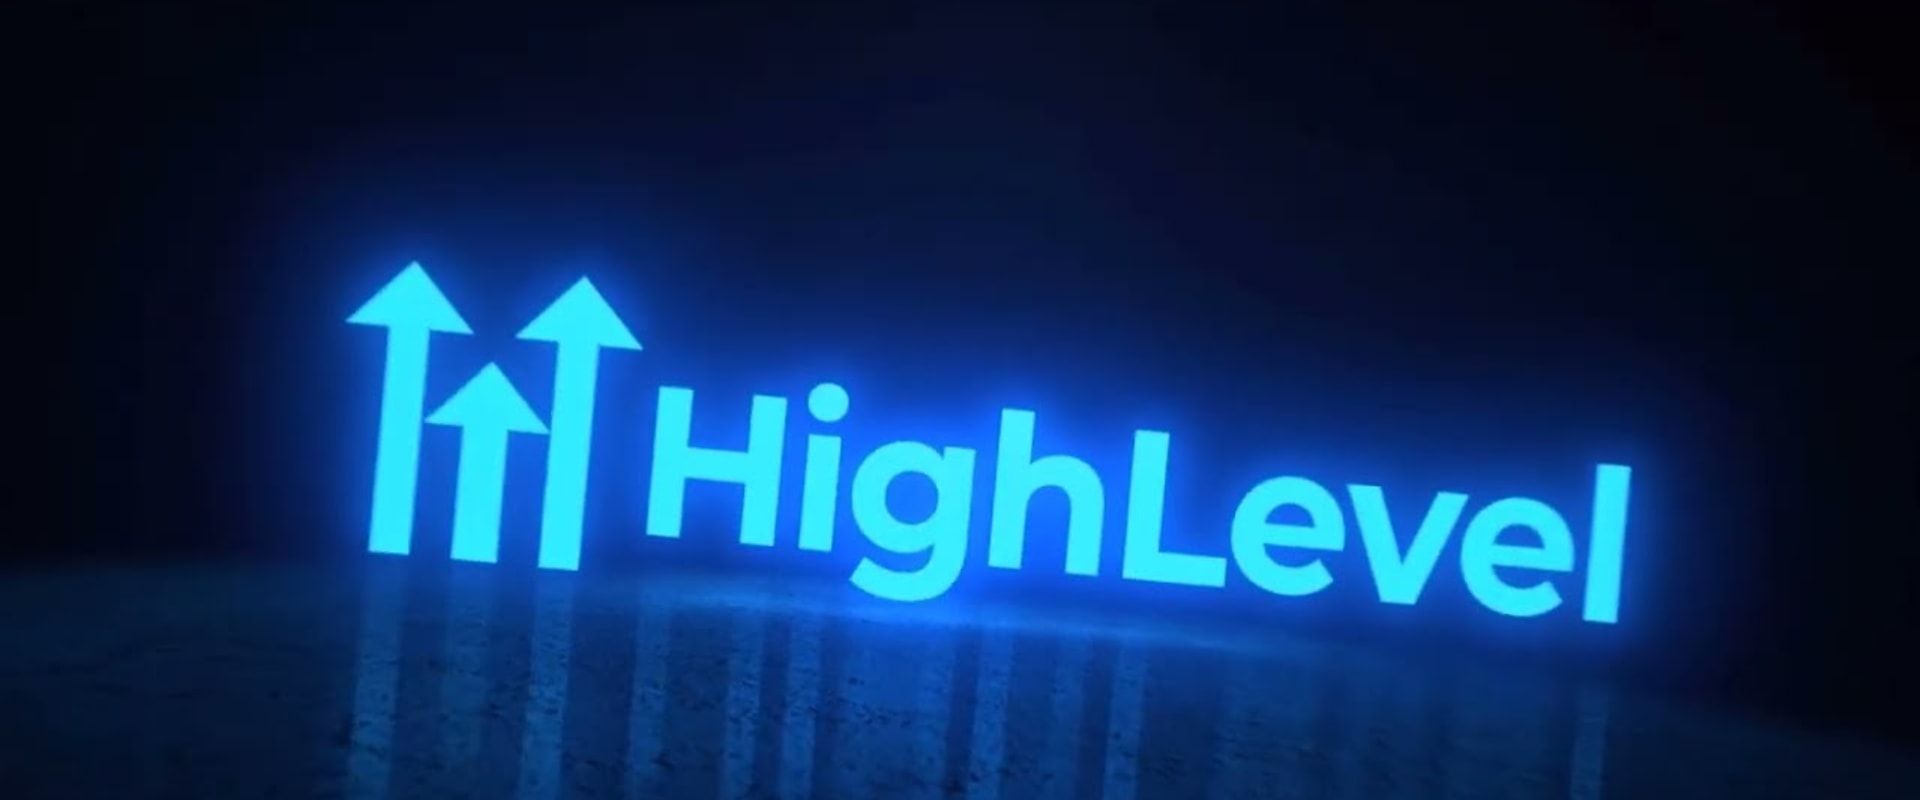 Gohighlevel:The Ultimate CRM for Small Businesses